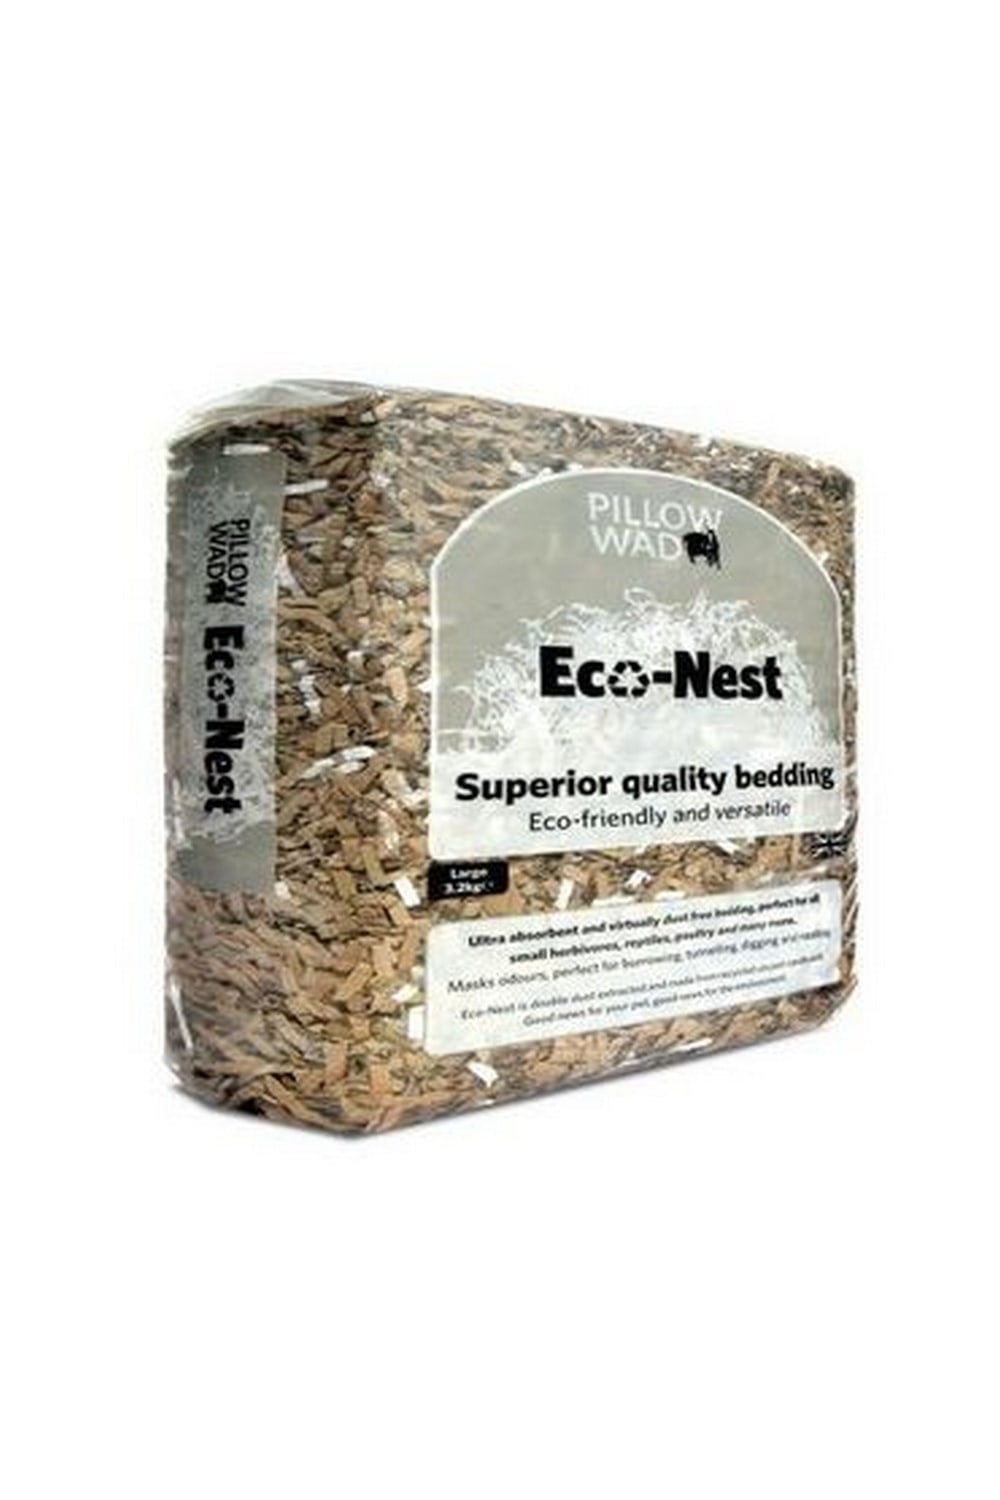 Pillow Wad Large Eco Nest Bedding (May Vary) (7lbs)